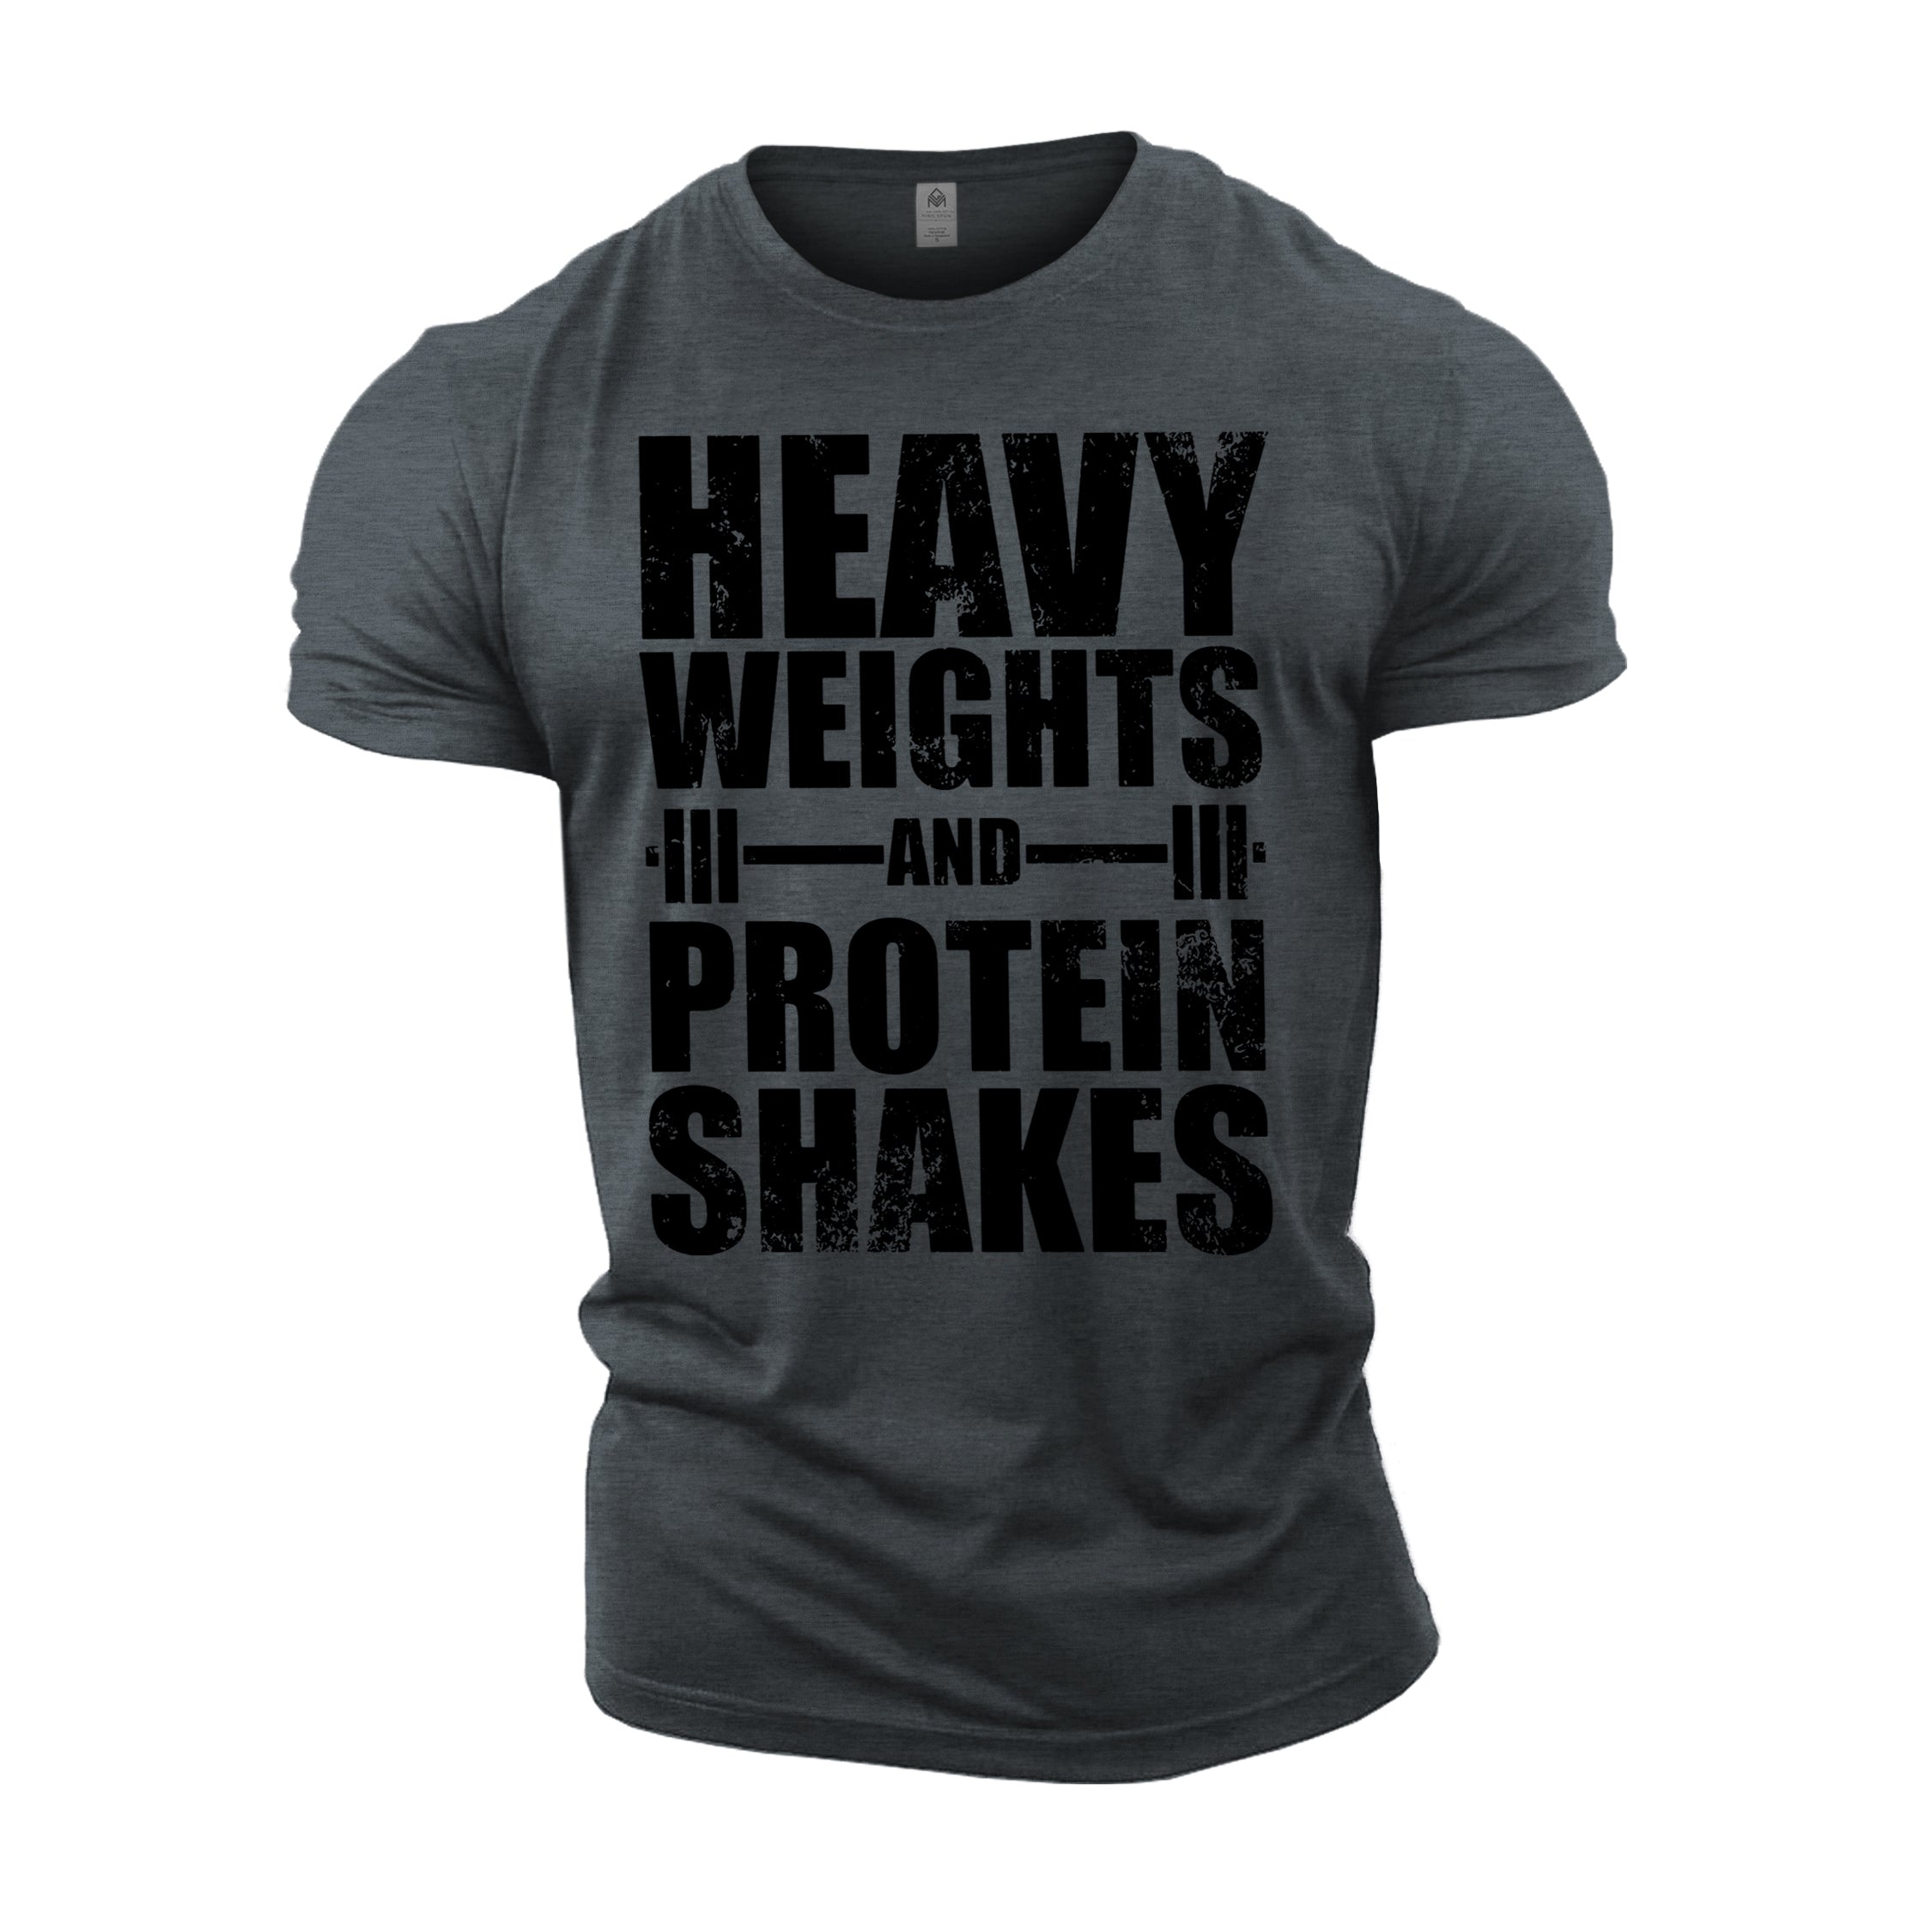 Heavy Weights and Protein Shakes, UK Bodybuilding T-Shirt Gym Workout  Training